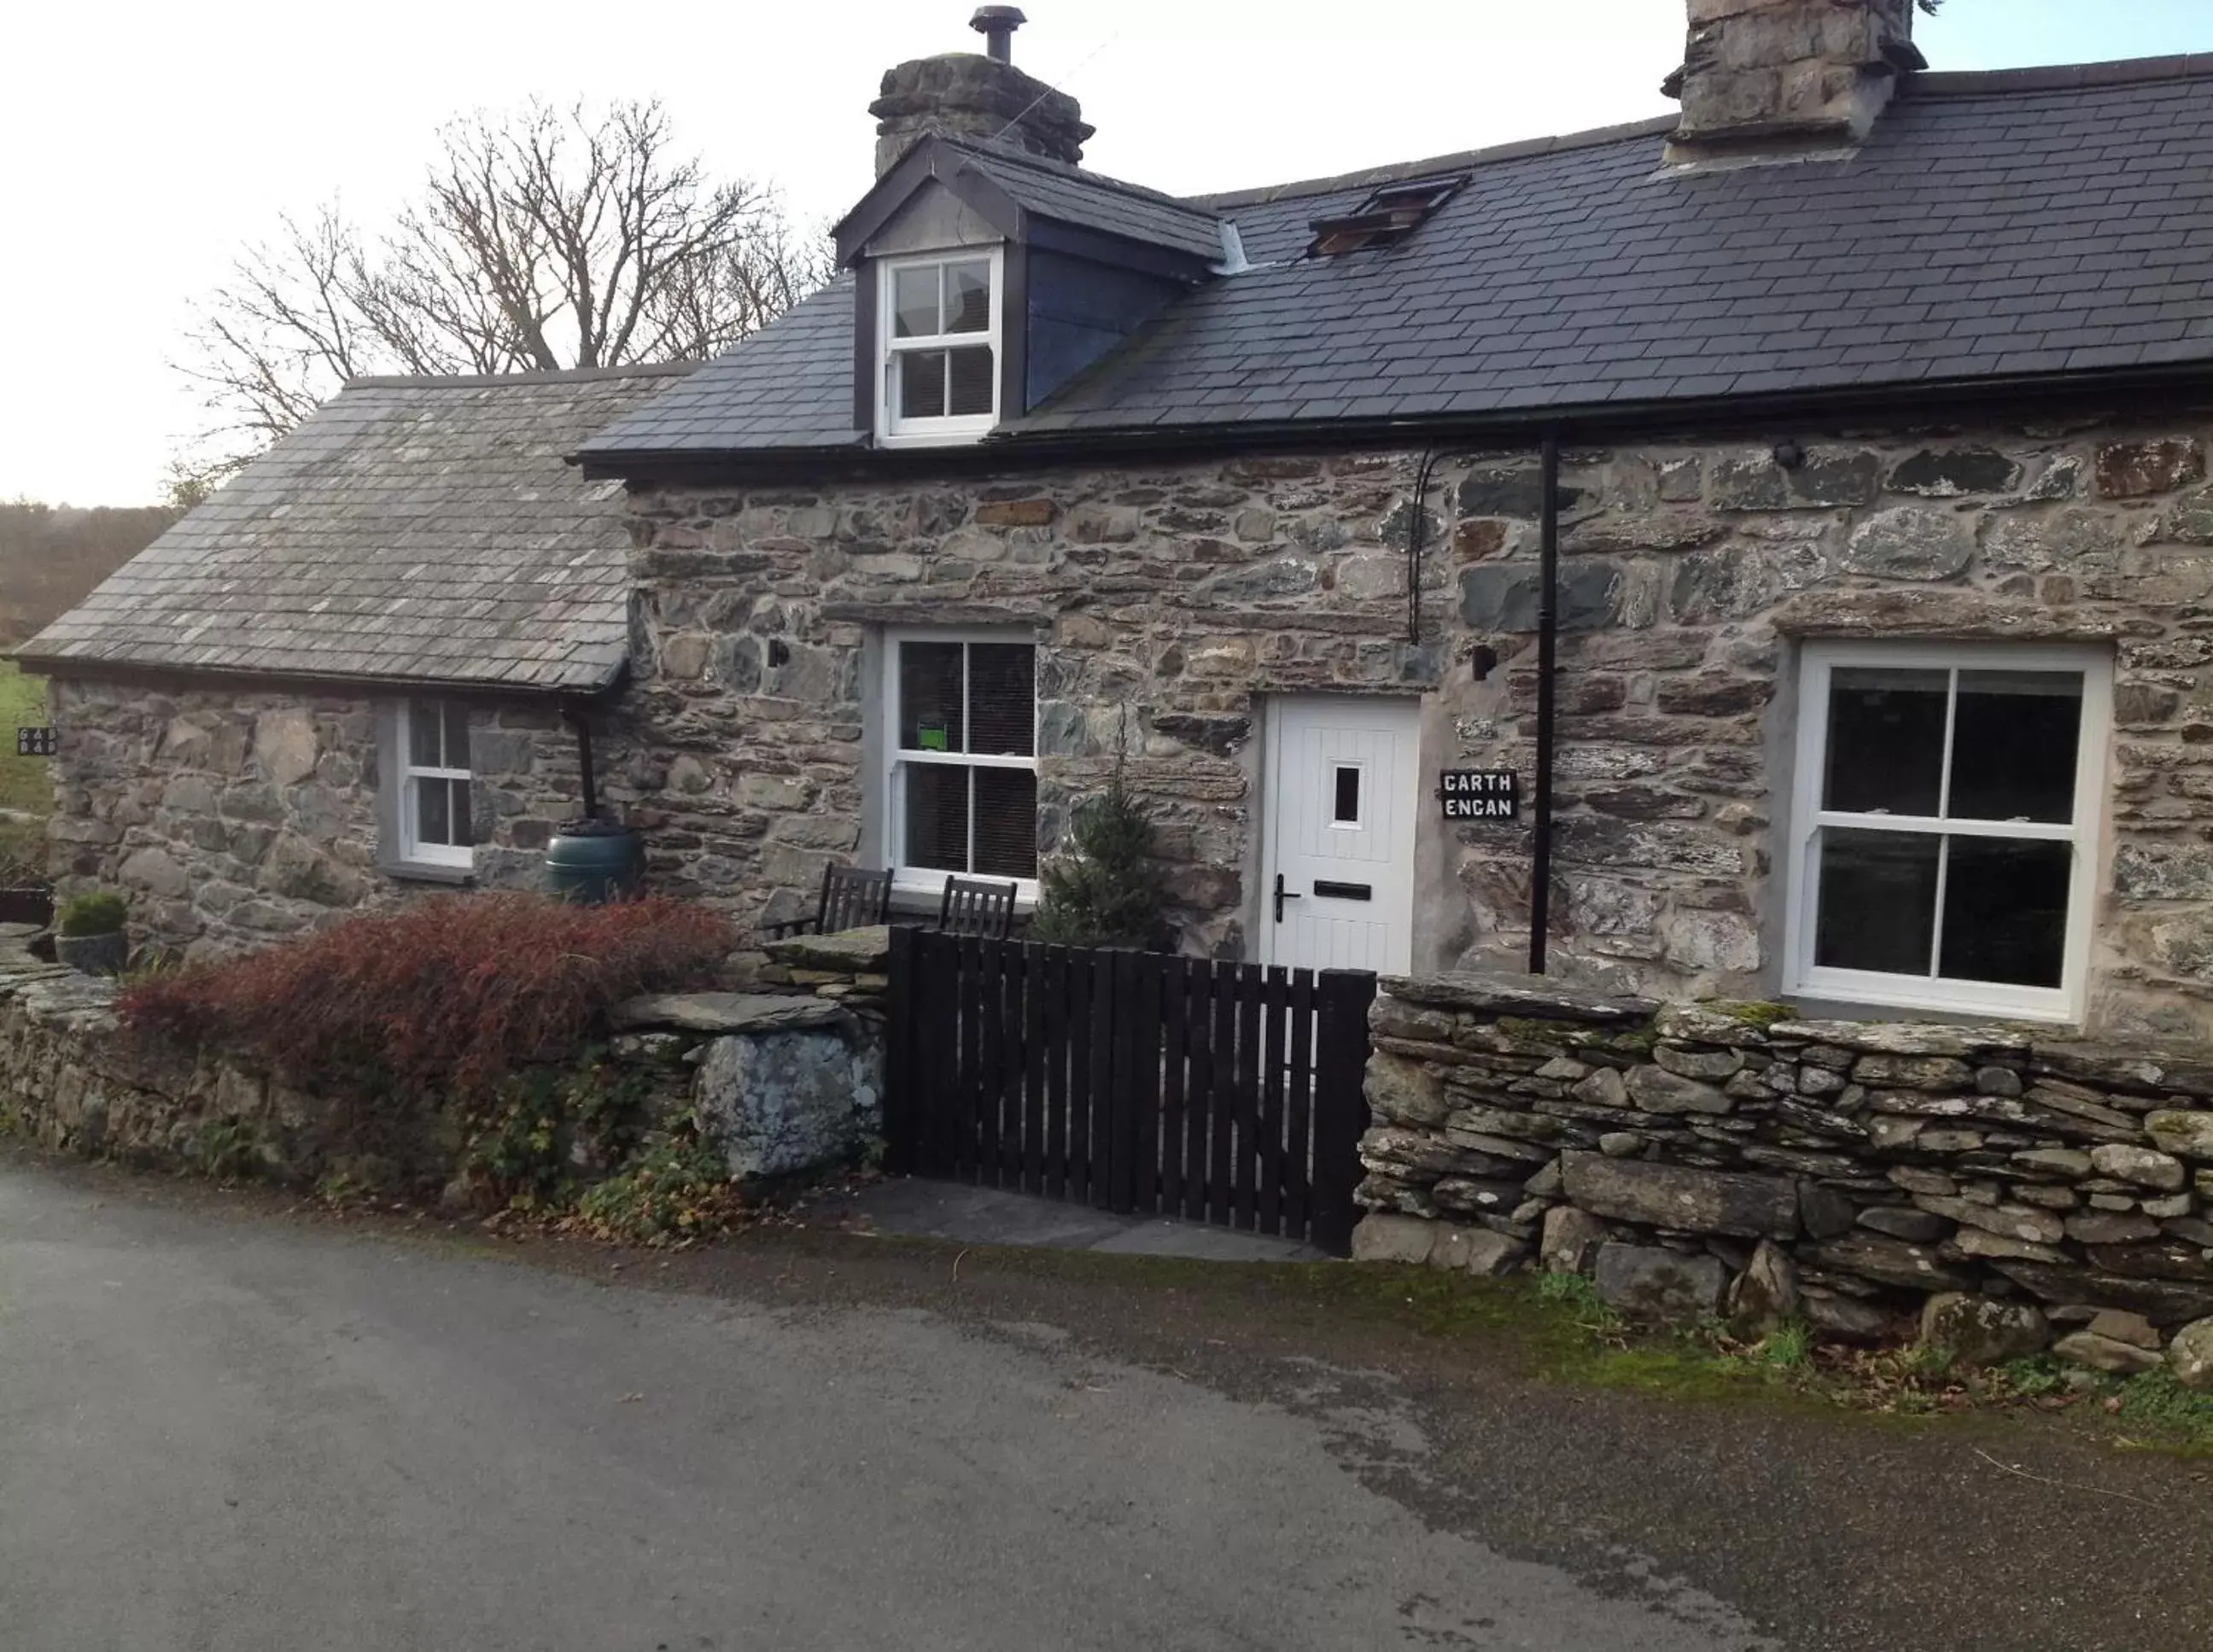 Facade/entrance, Property Building in Garth Engan Private Self Contained B&B with Garden Area